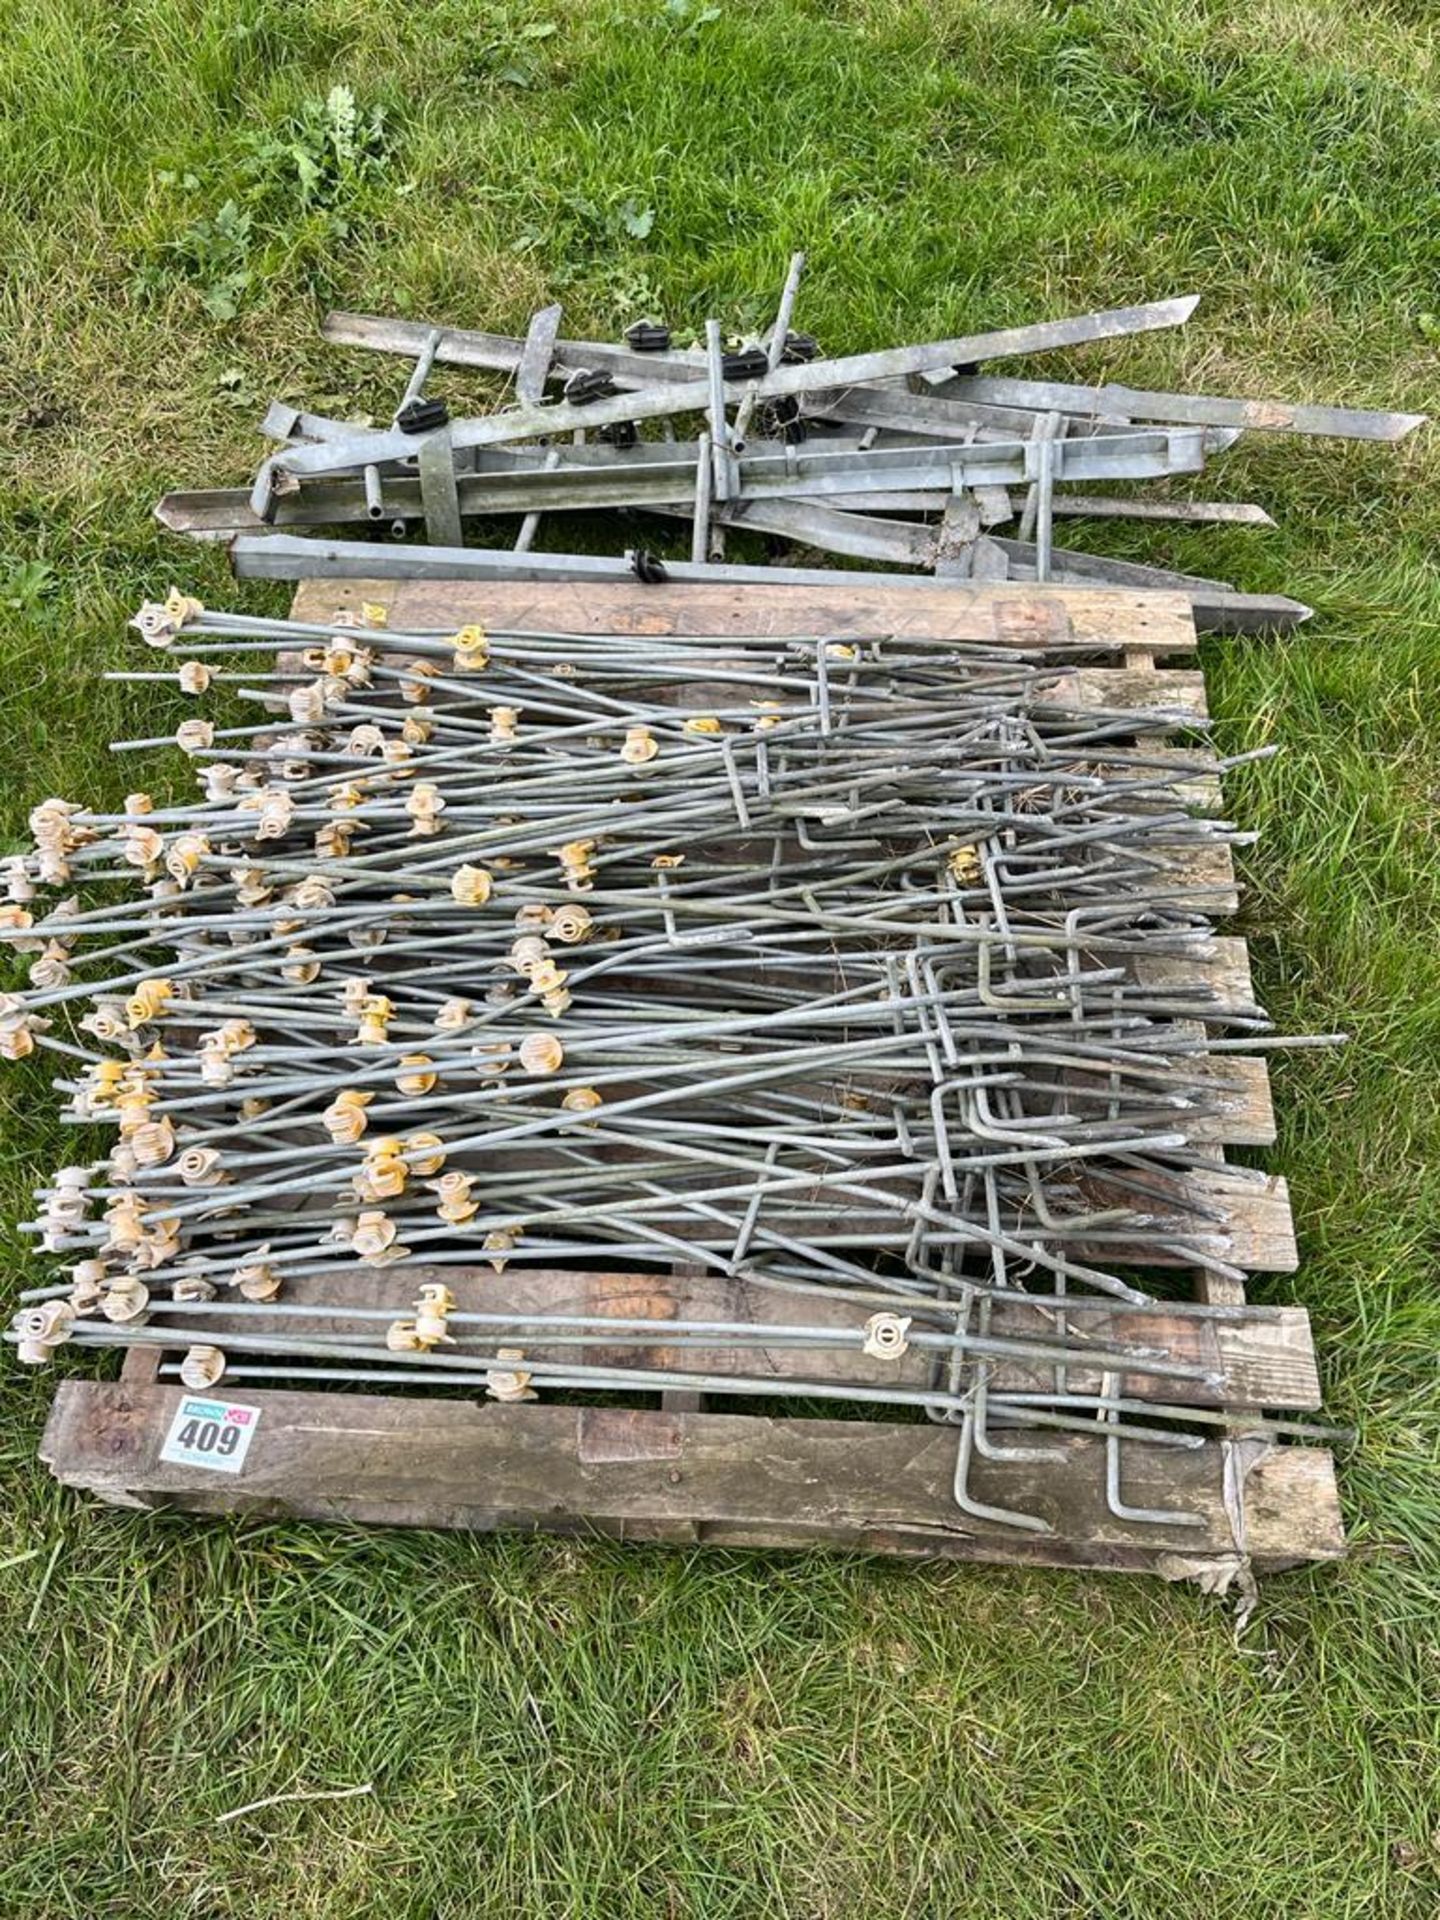 100No. Galvanised Electric Fence Stakes c/w Corner & Reel Posts - Image 2 of 2